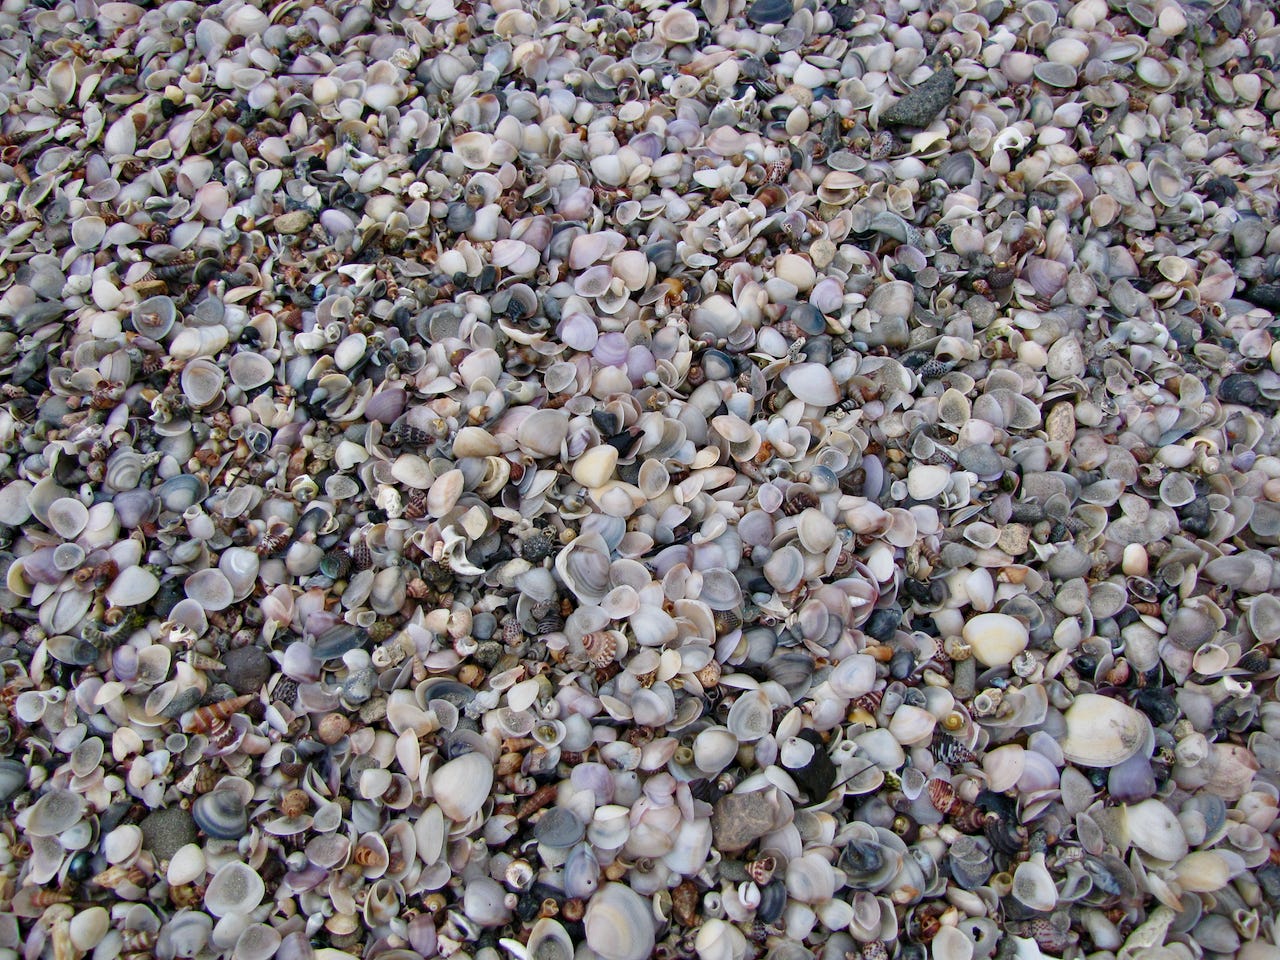 Beach close-up: thousands of shells of various species, predominantly pipis